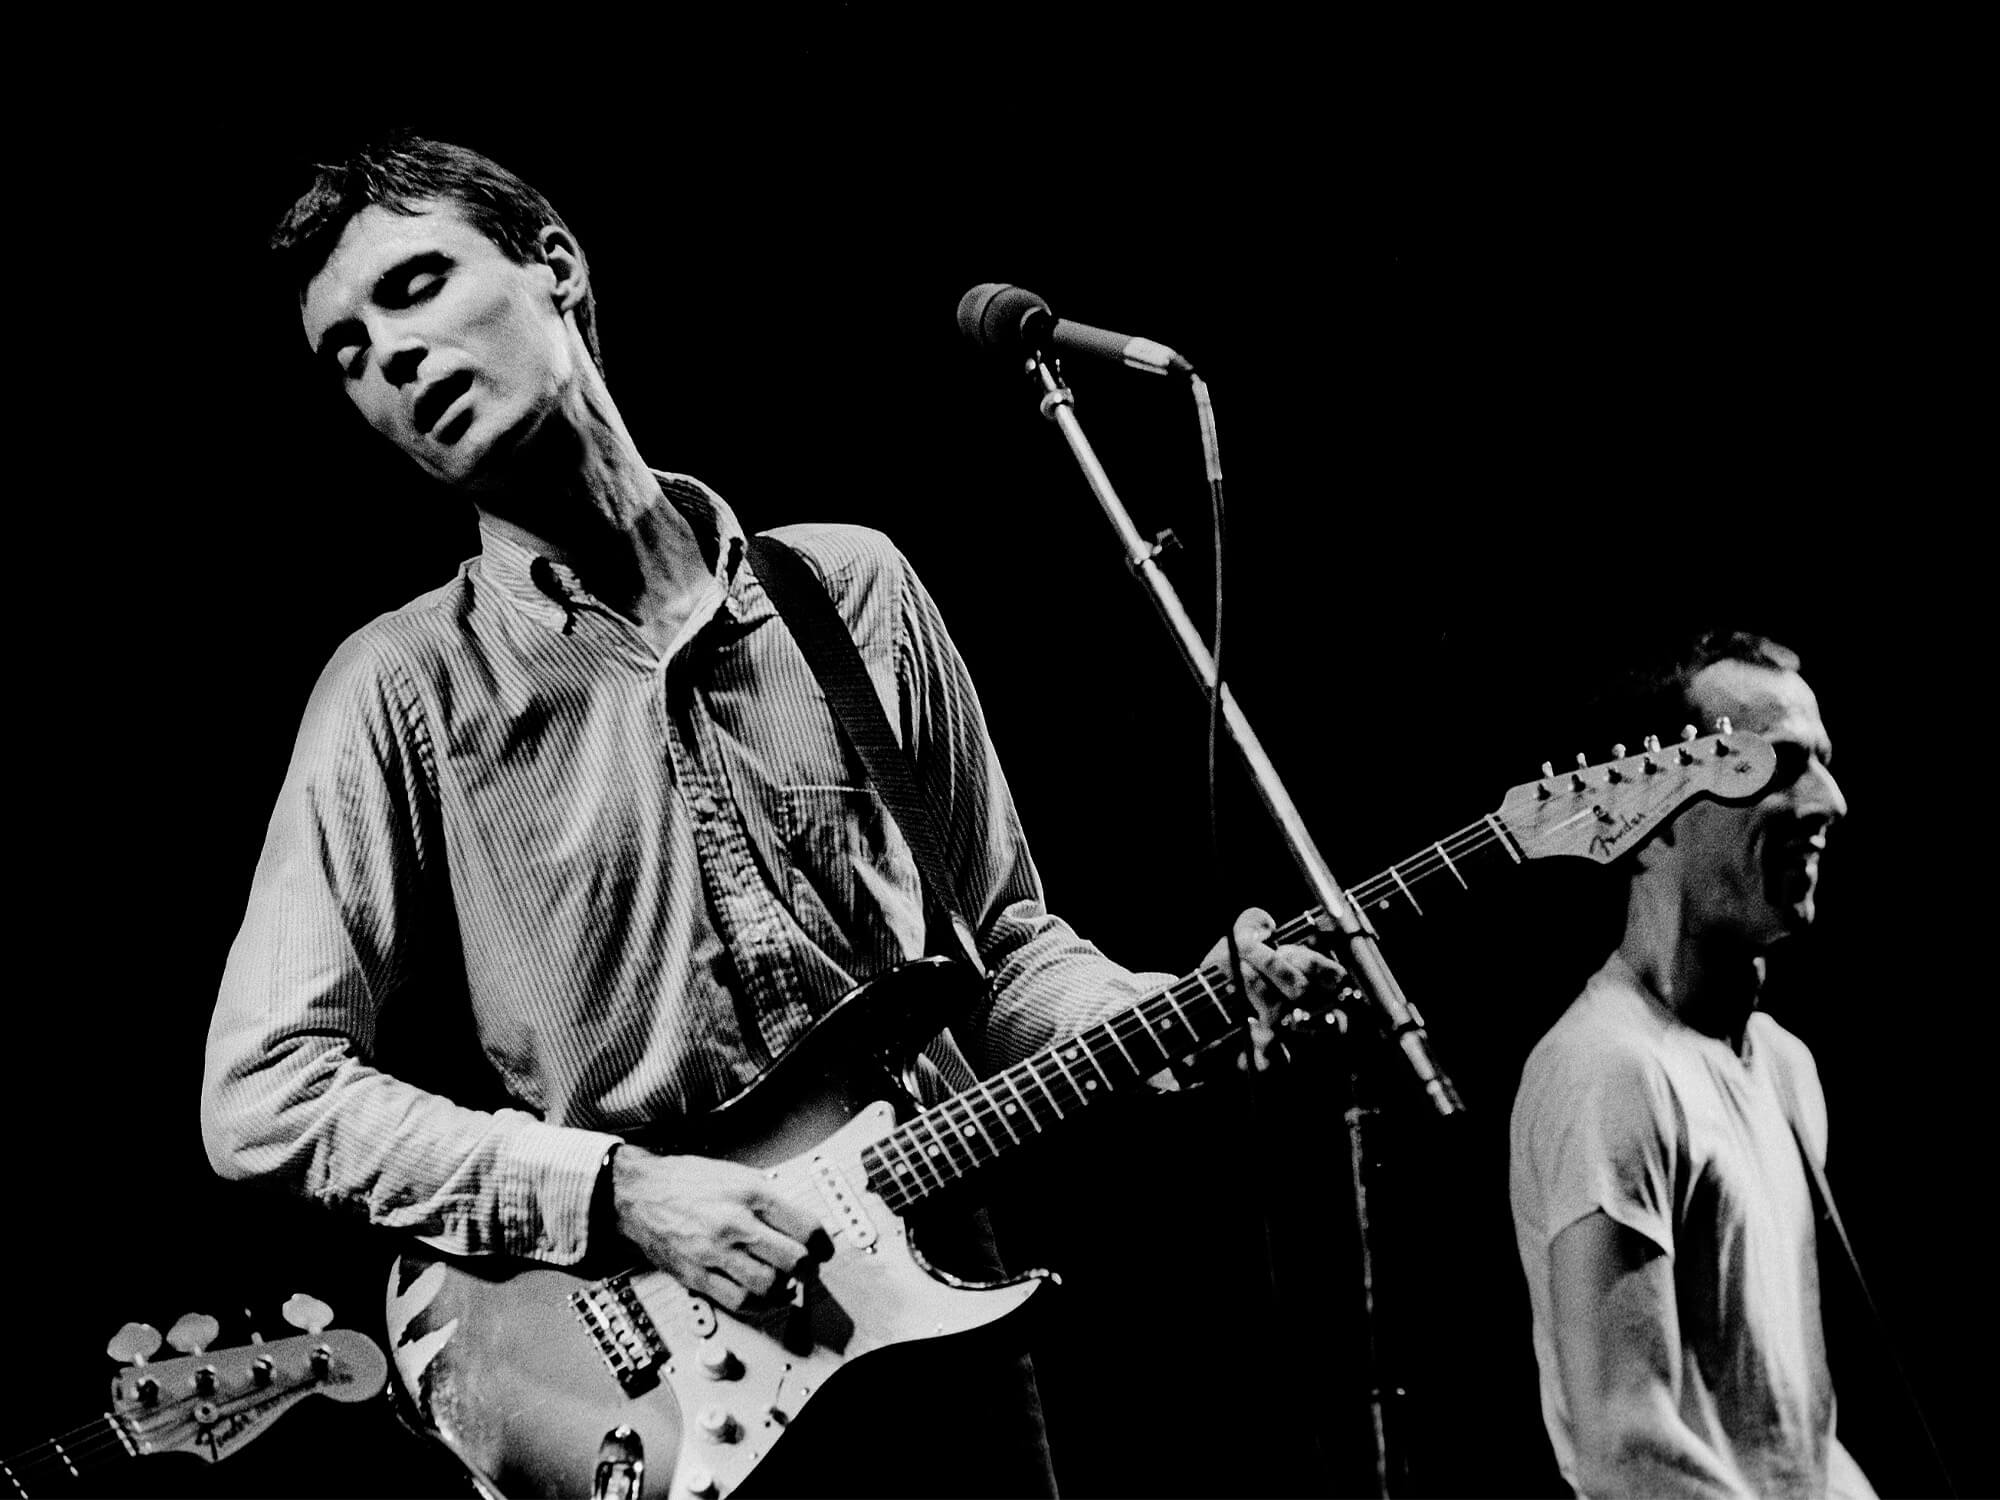 David Byrne on stage in 1980, playing a Stratocaster.